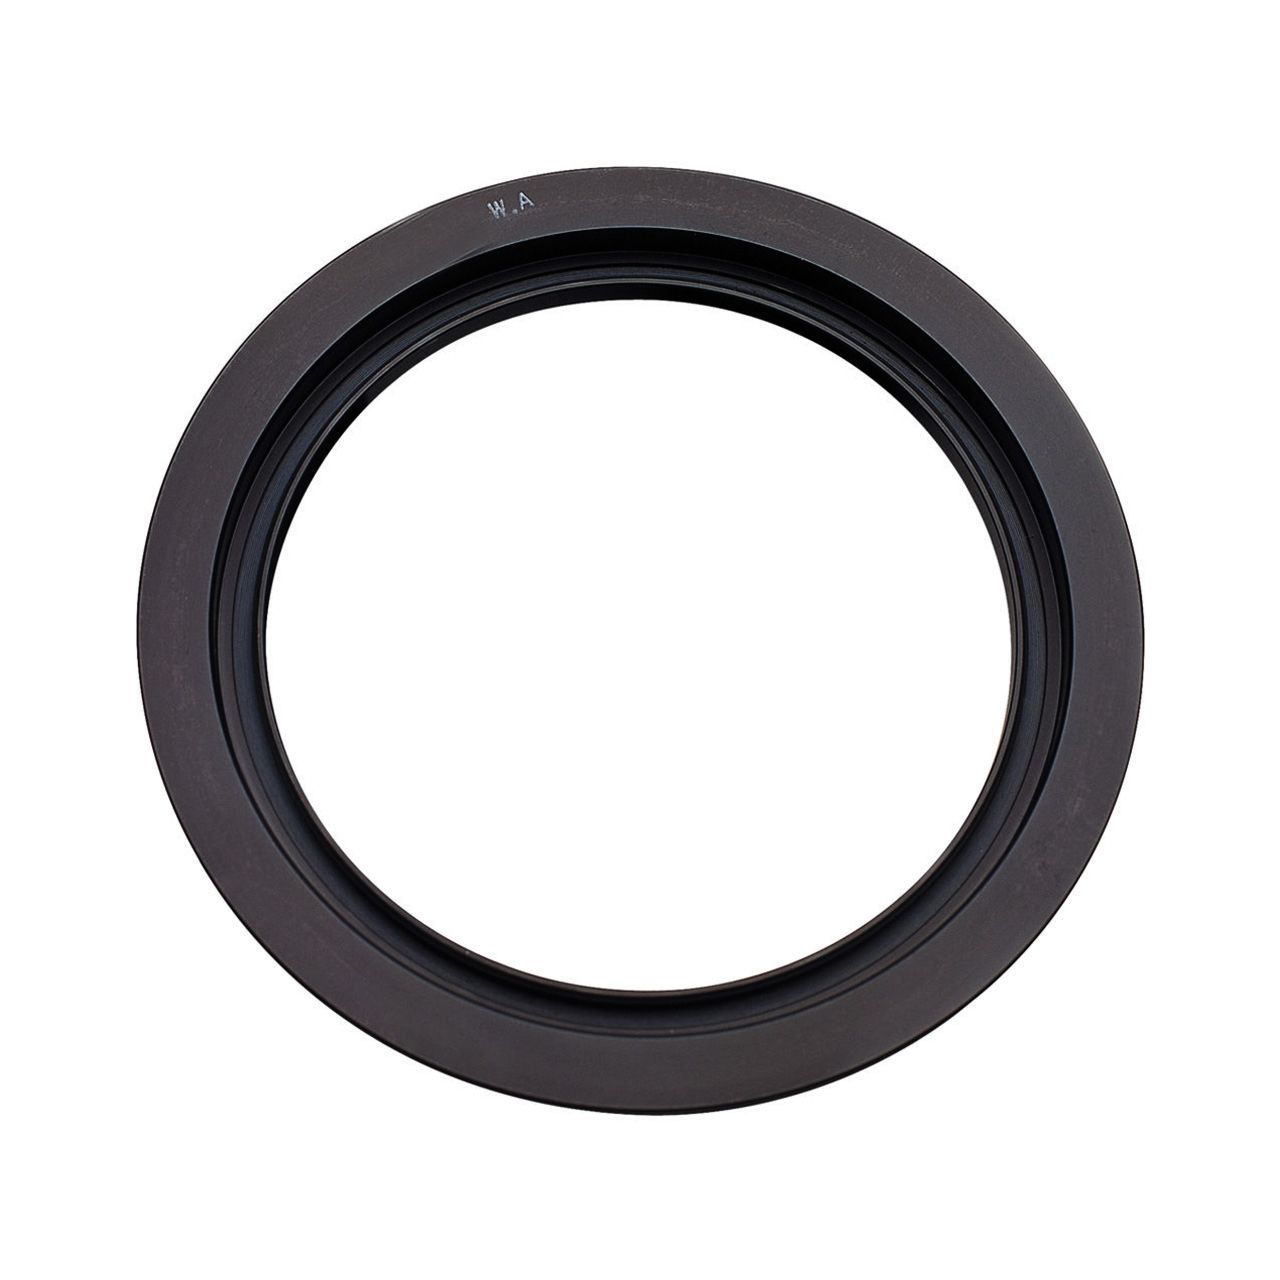 LEE Filters Wide Angle Adapter Ring 67Mm